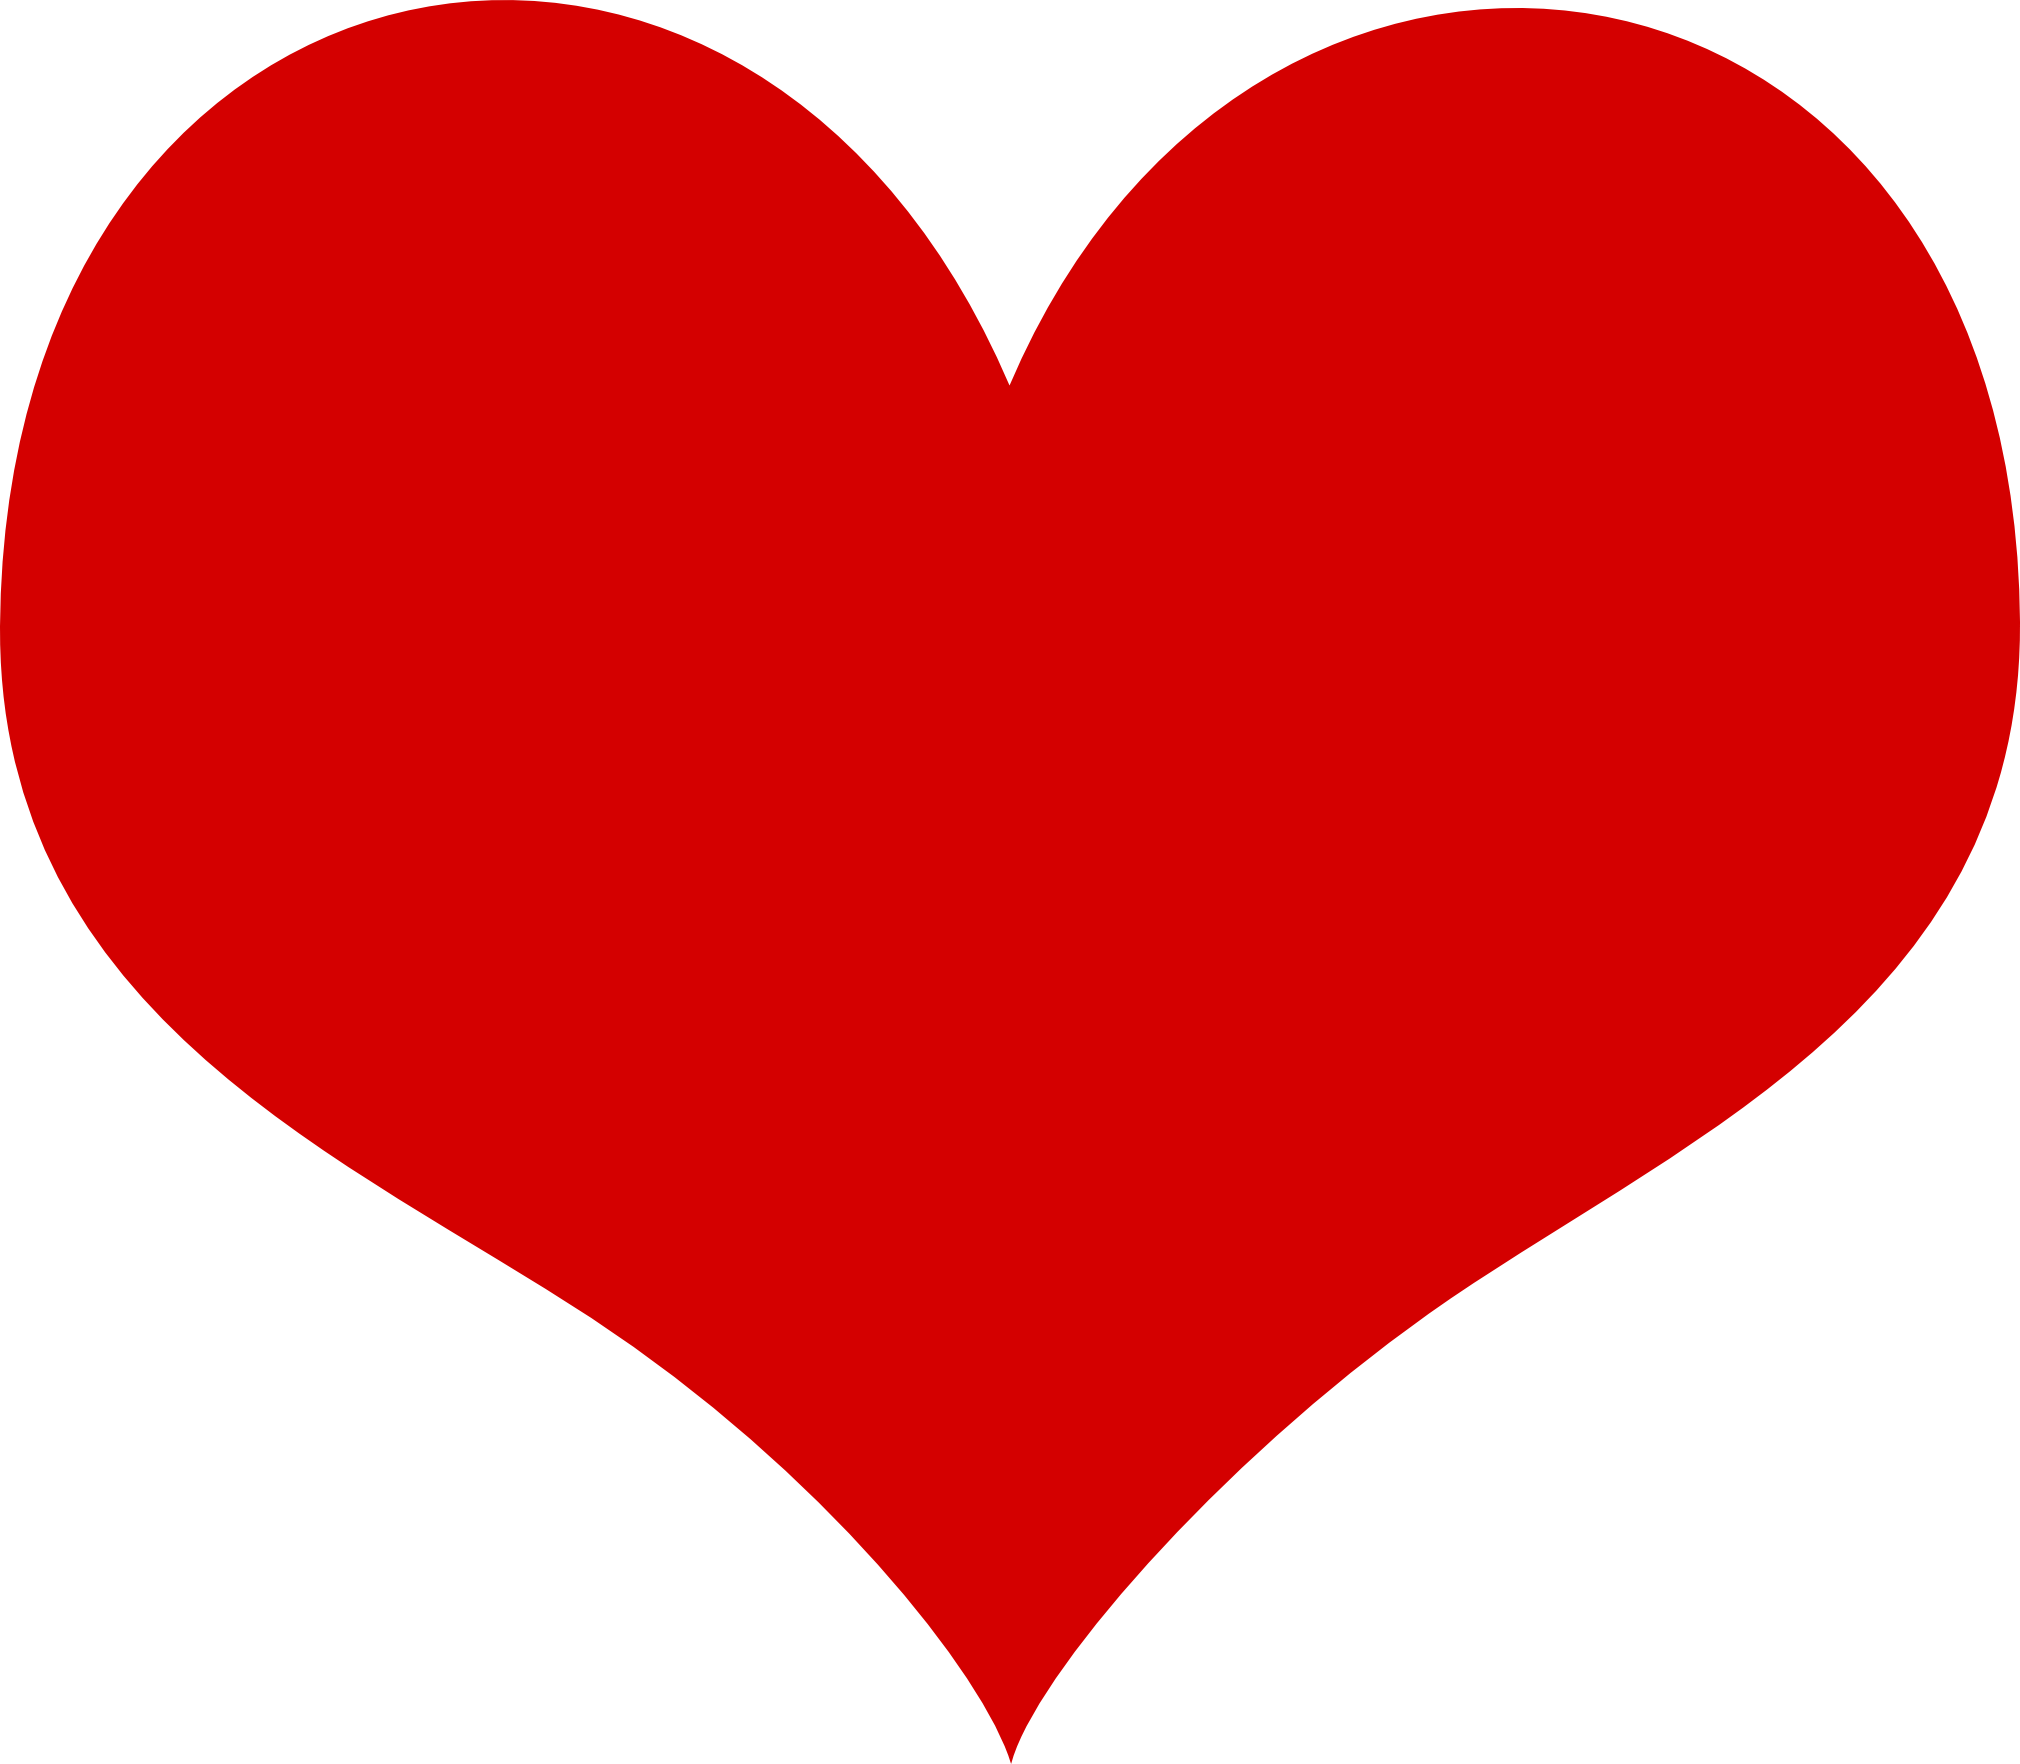 heart clipart images #14301